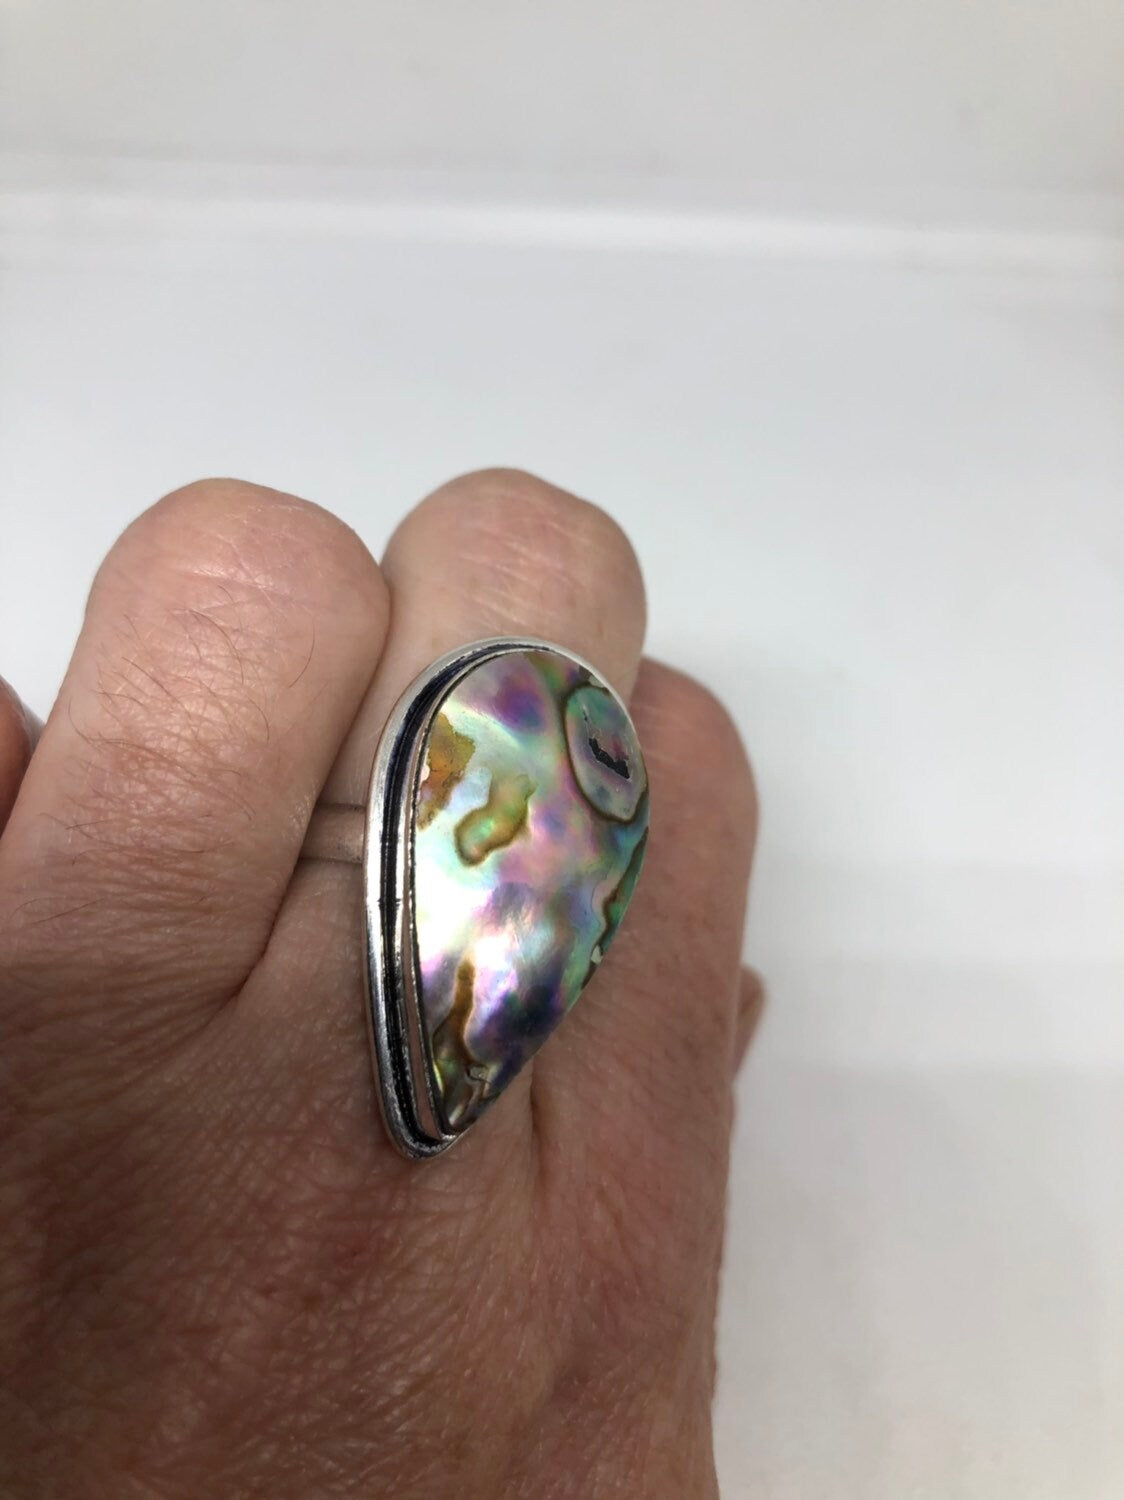 Antique Green Abalone Gothic Filigree Silver Ring